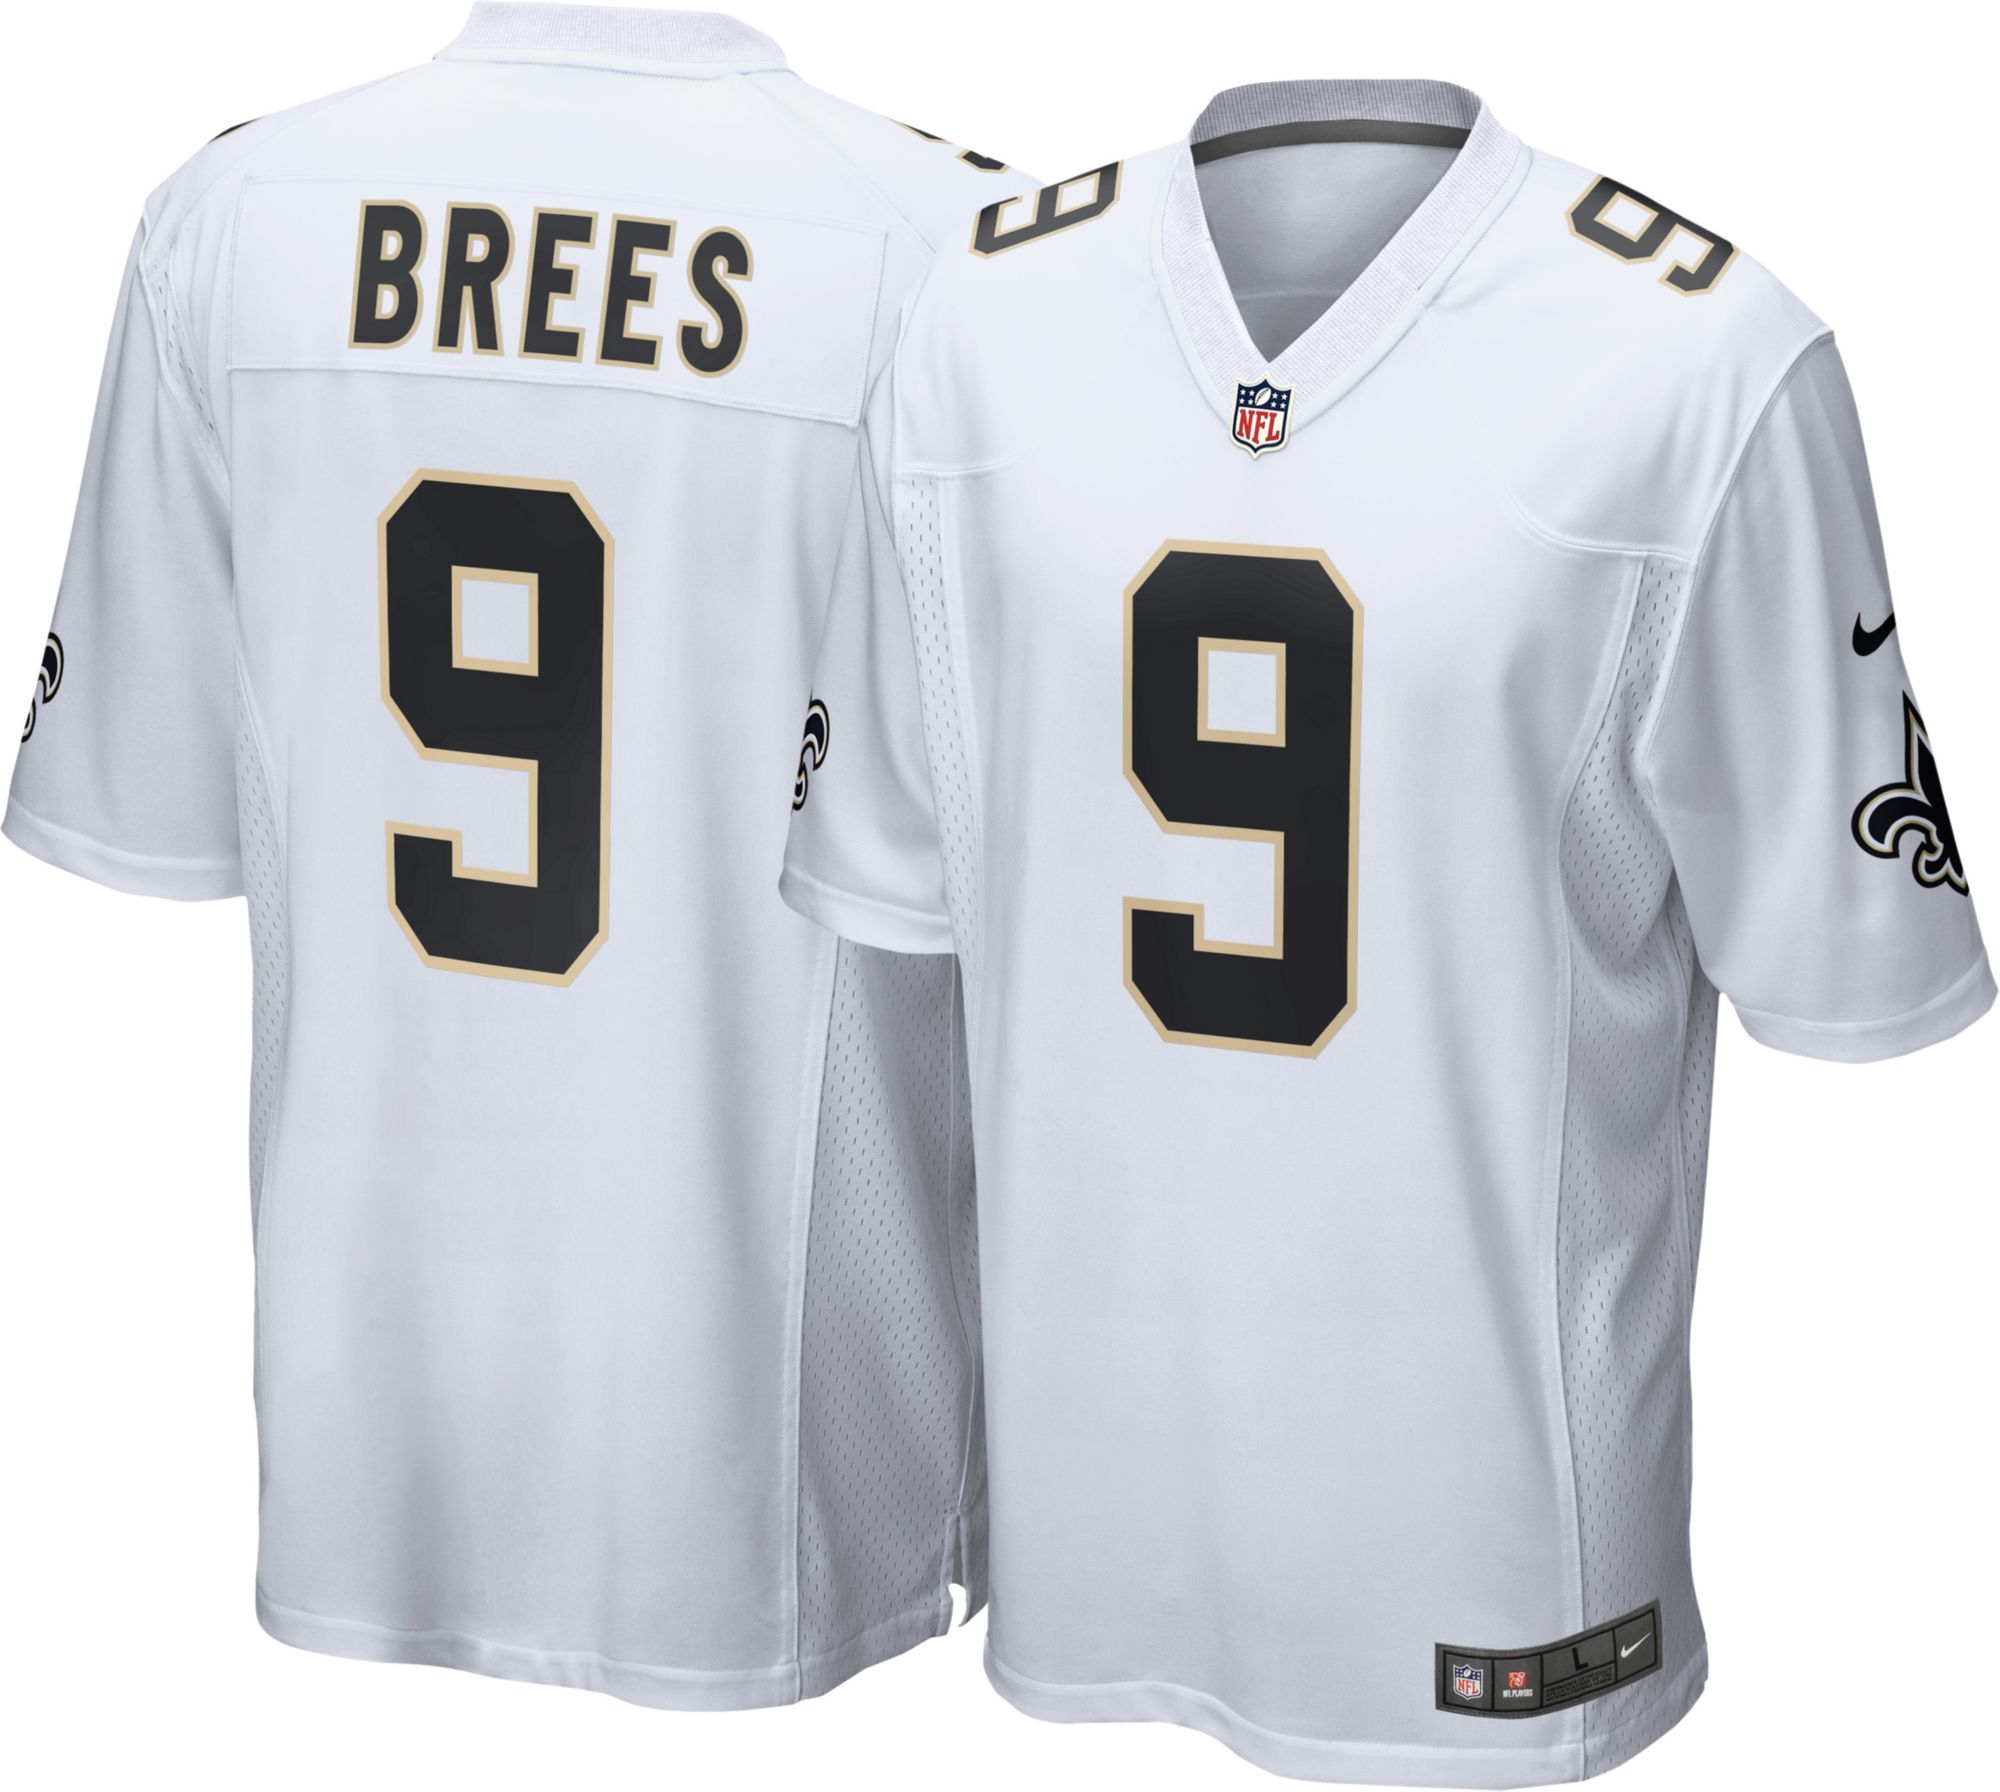 saints white and gold jersey